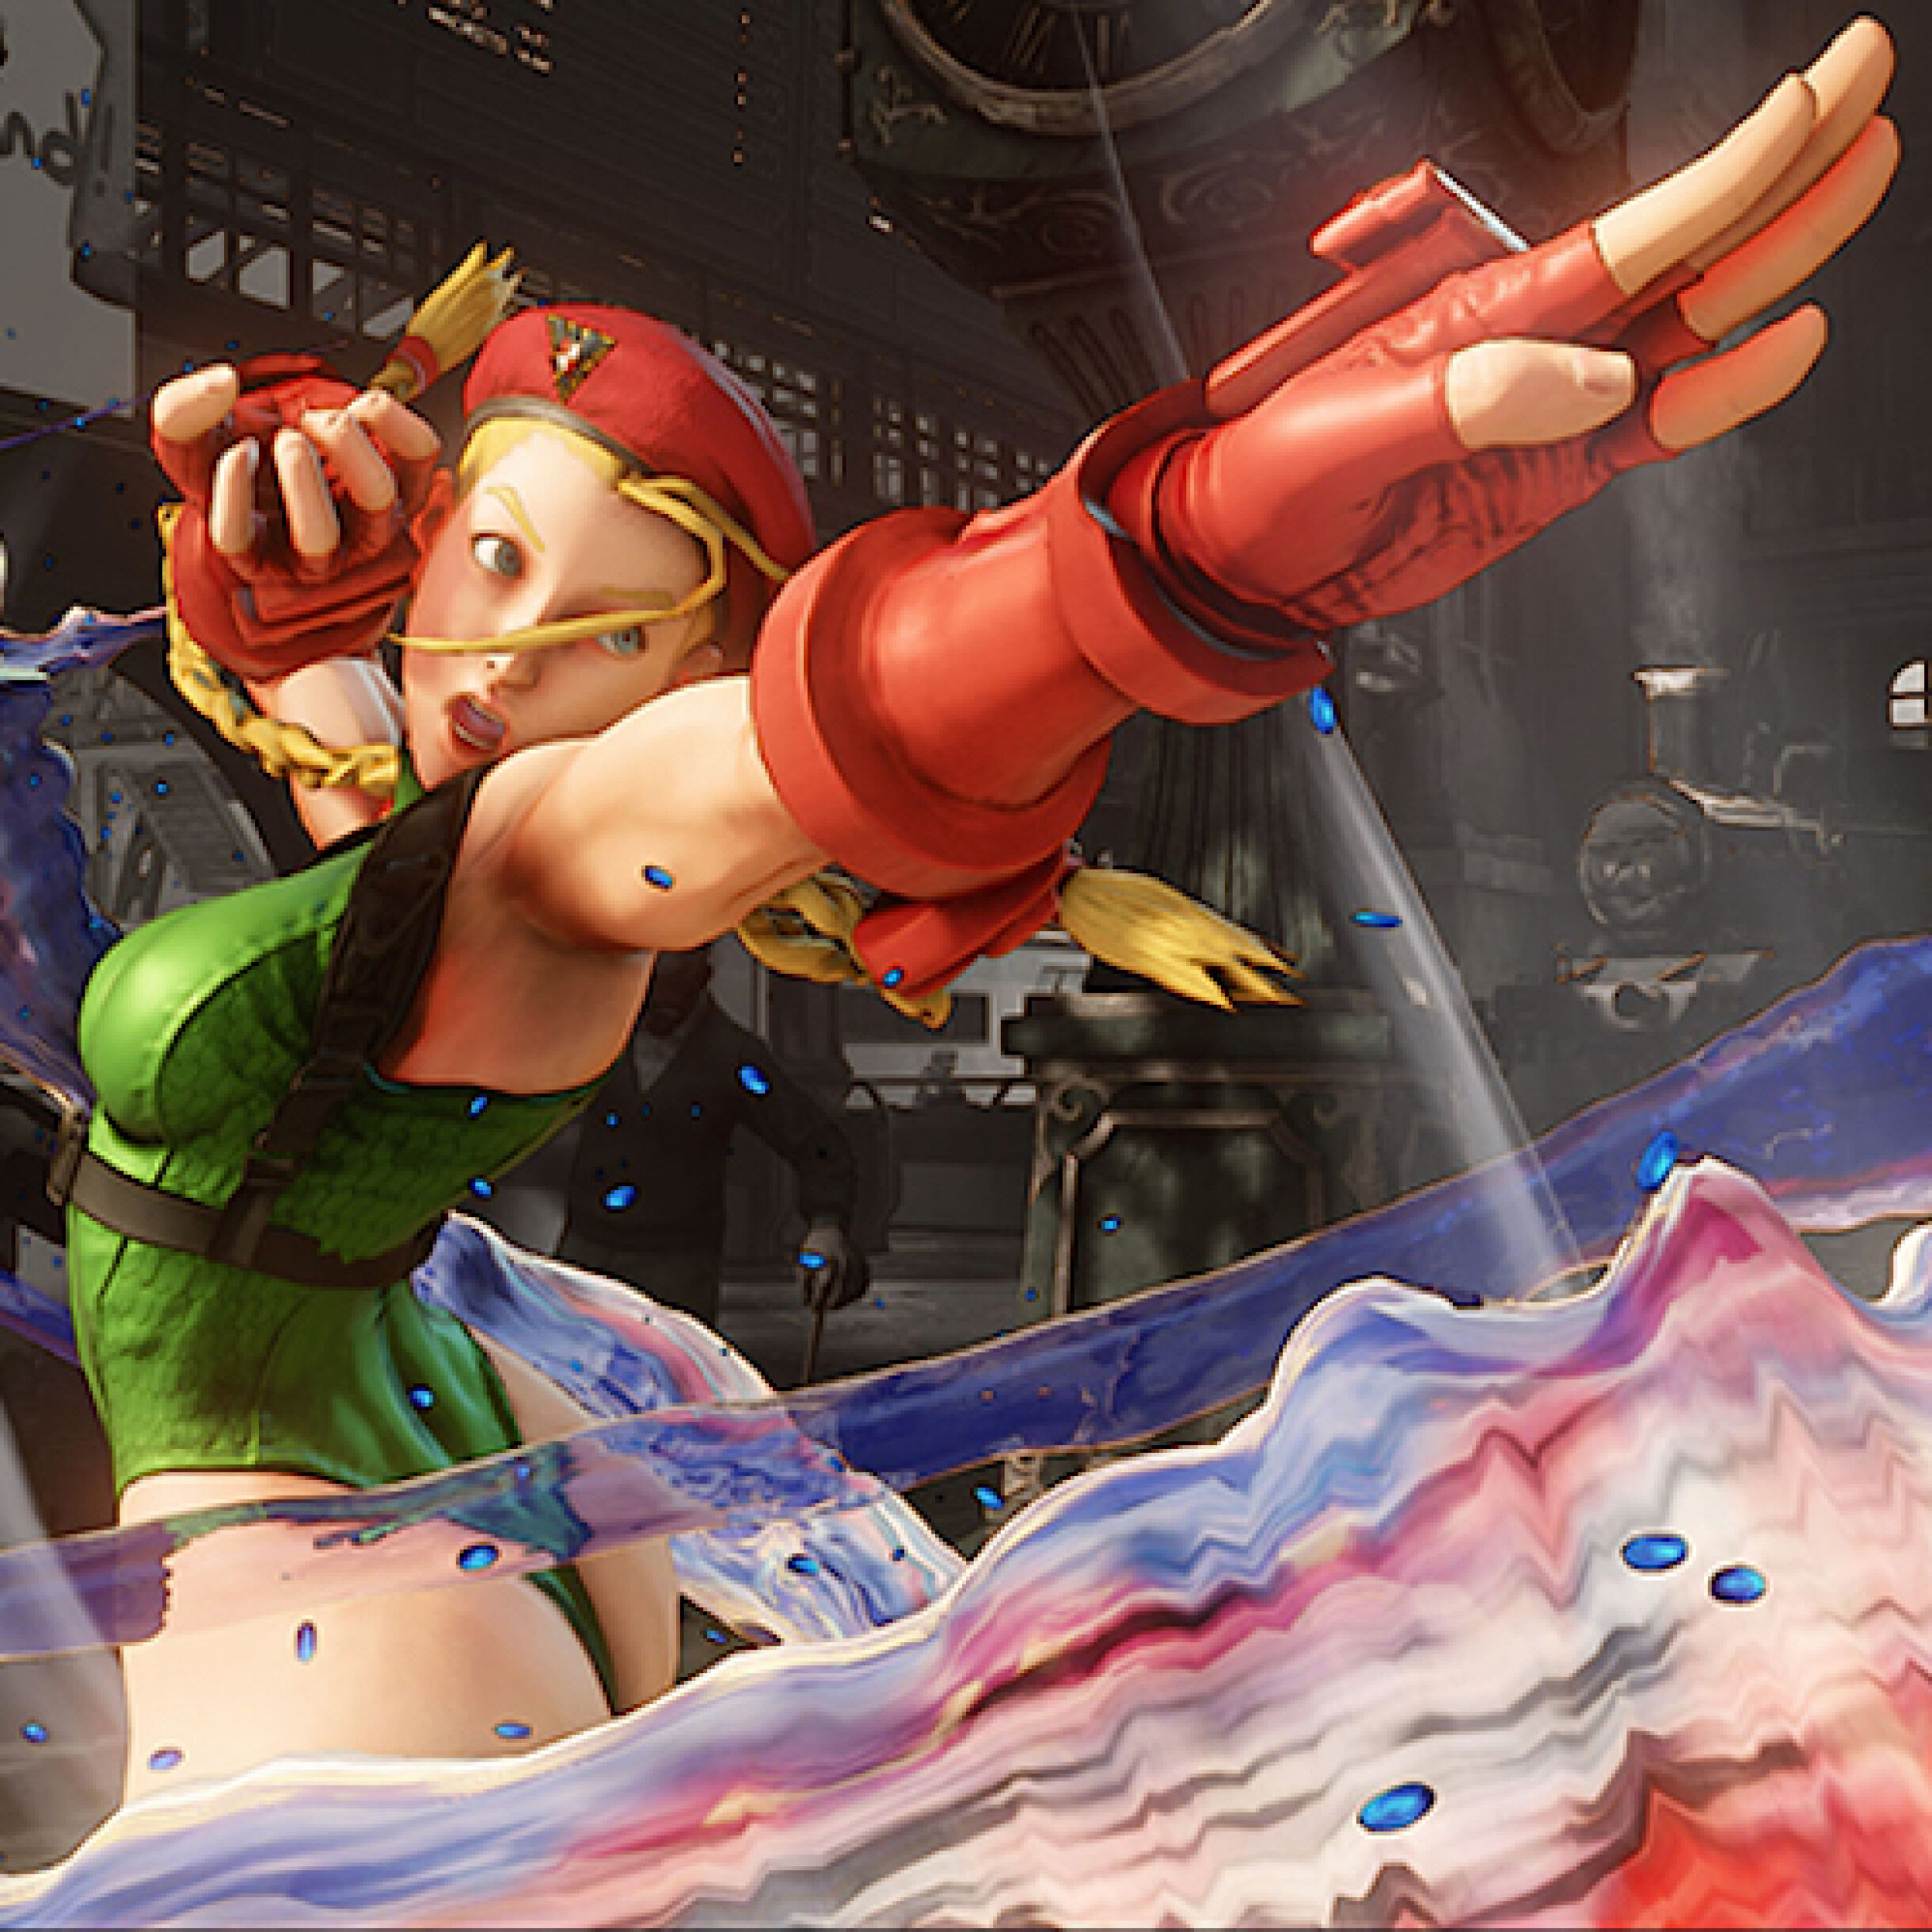 Capcom To Inject Sponsored Content Into 'Street Fighter V